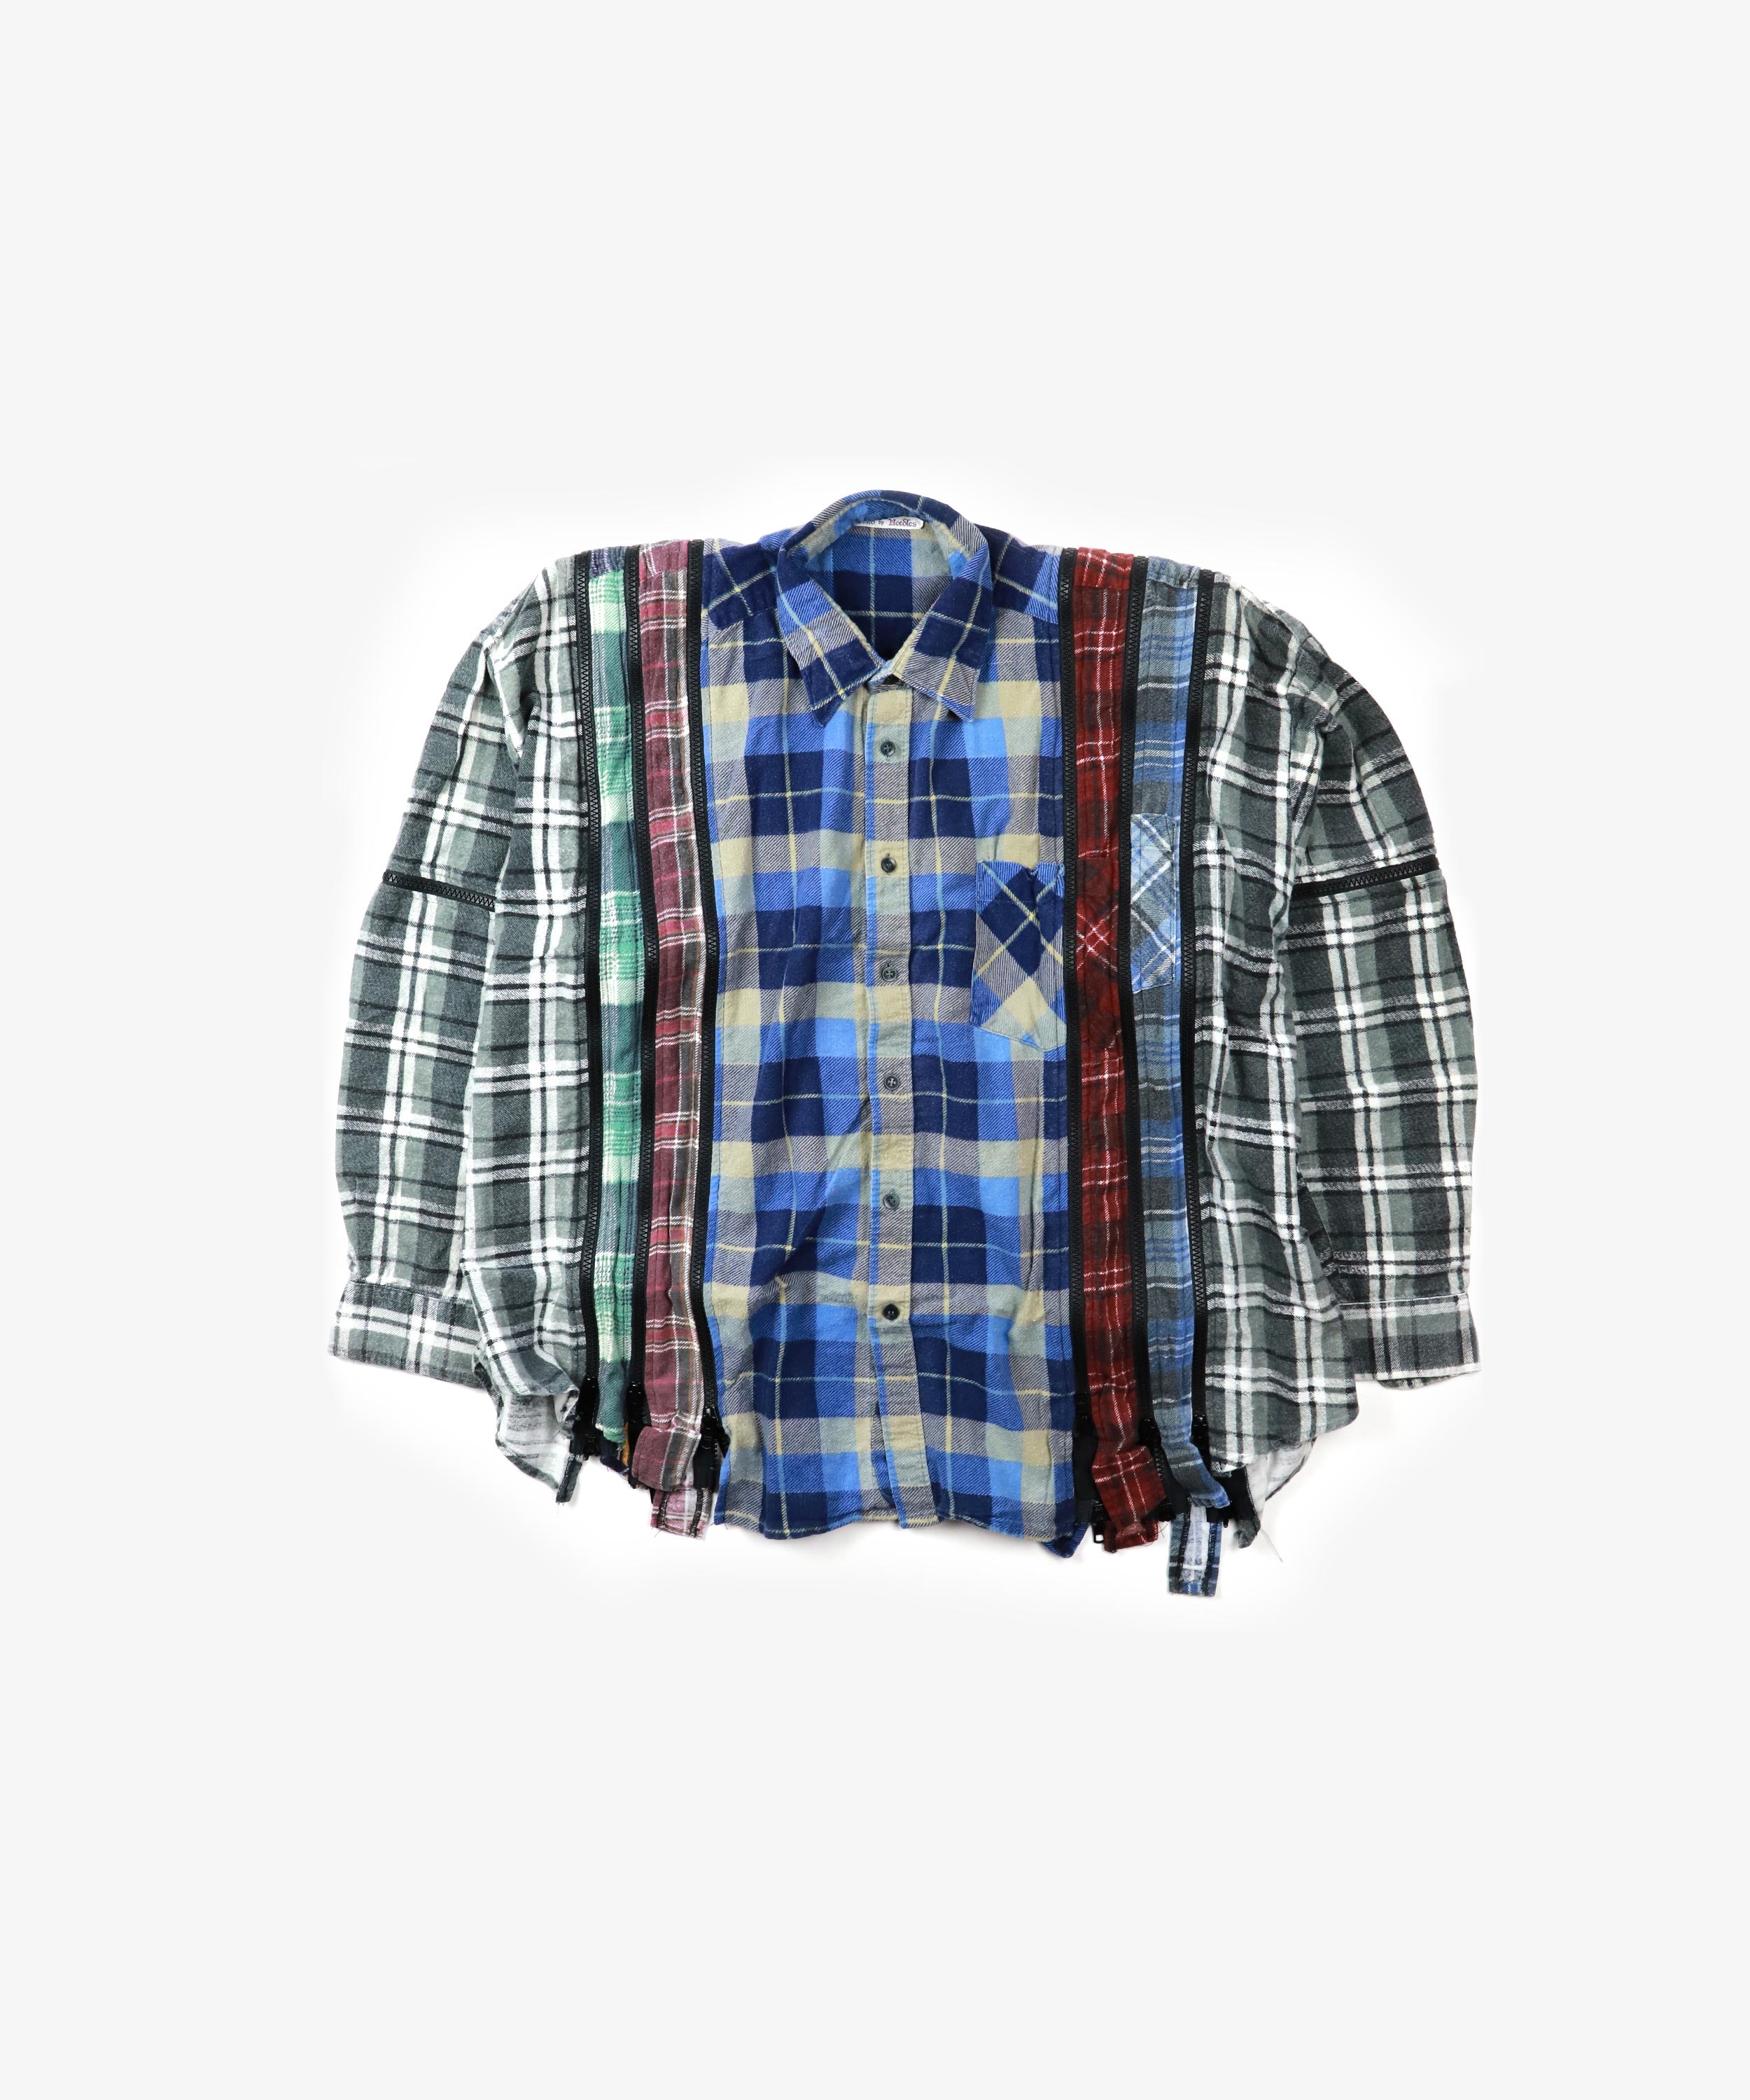 Rebuild by Needles Flannel Shirt -7 Cuts Wide / Zipped